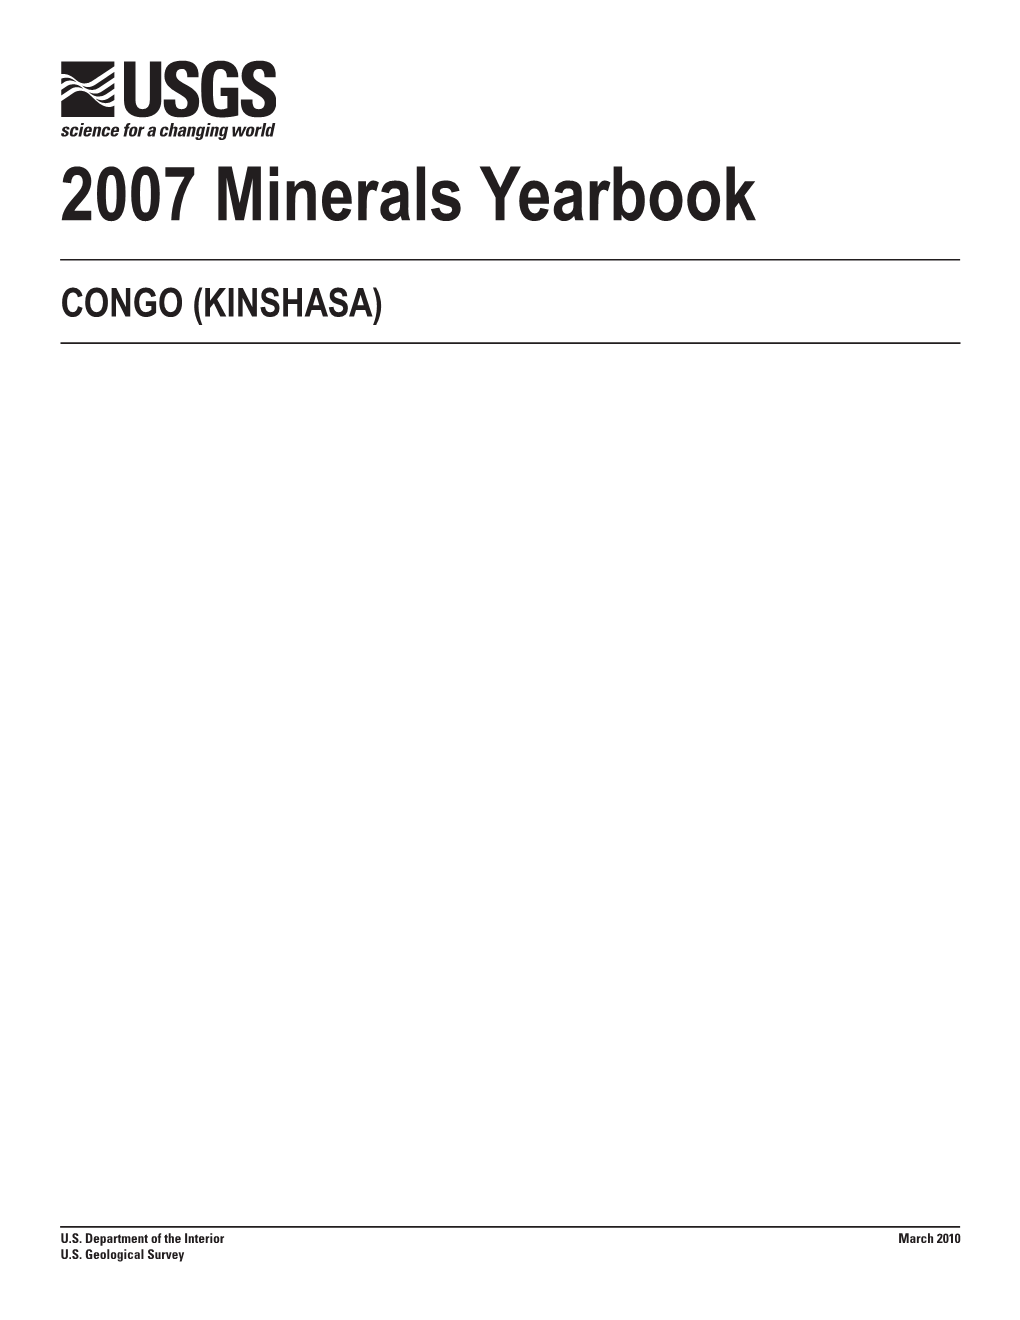 The Mineral Industry of Congo (Kinshasa) in 2007